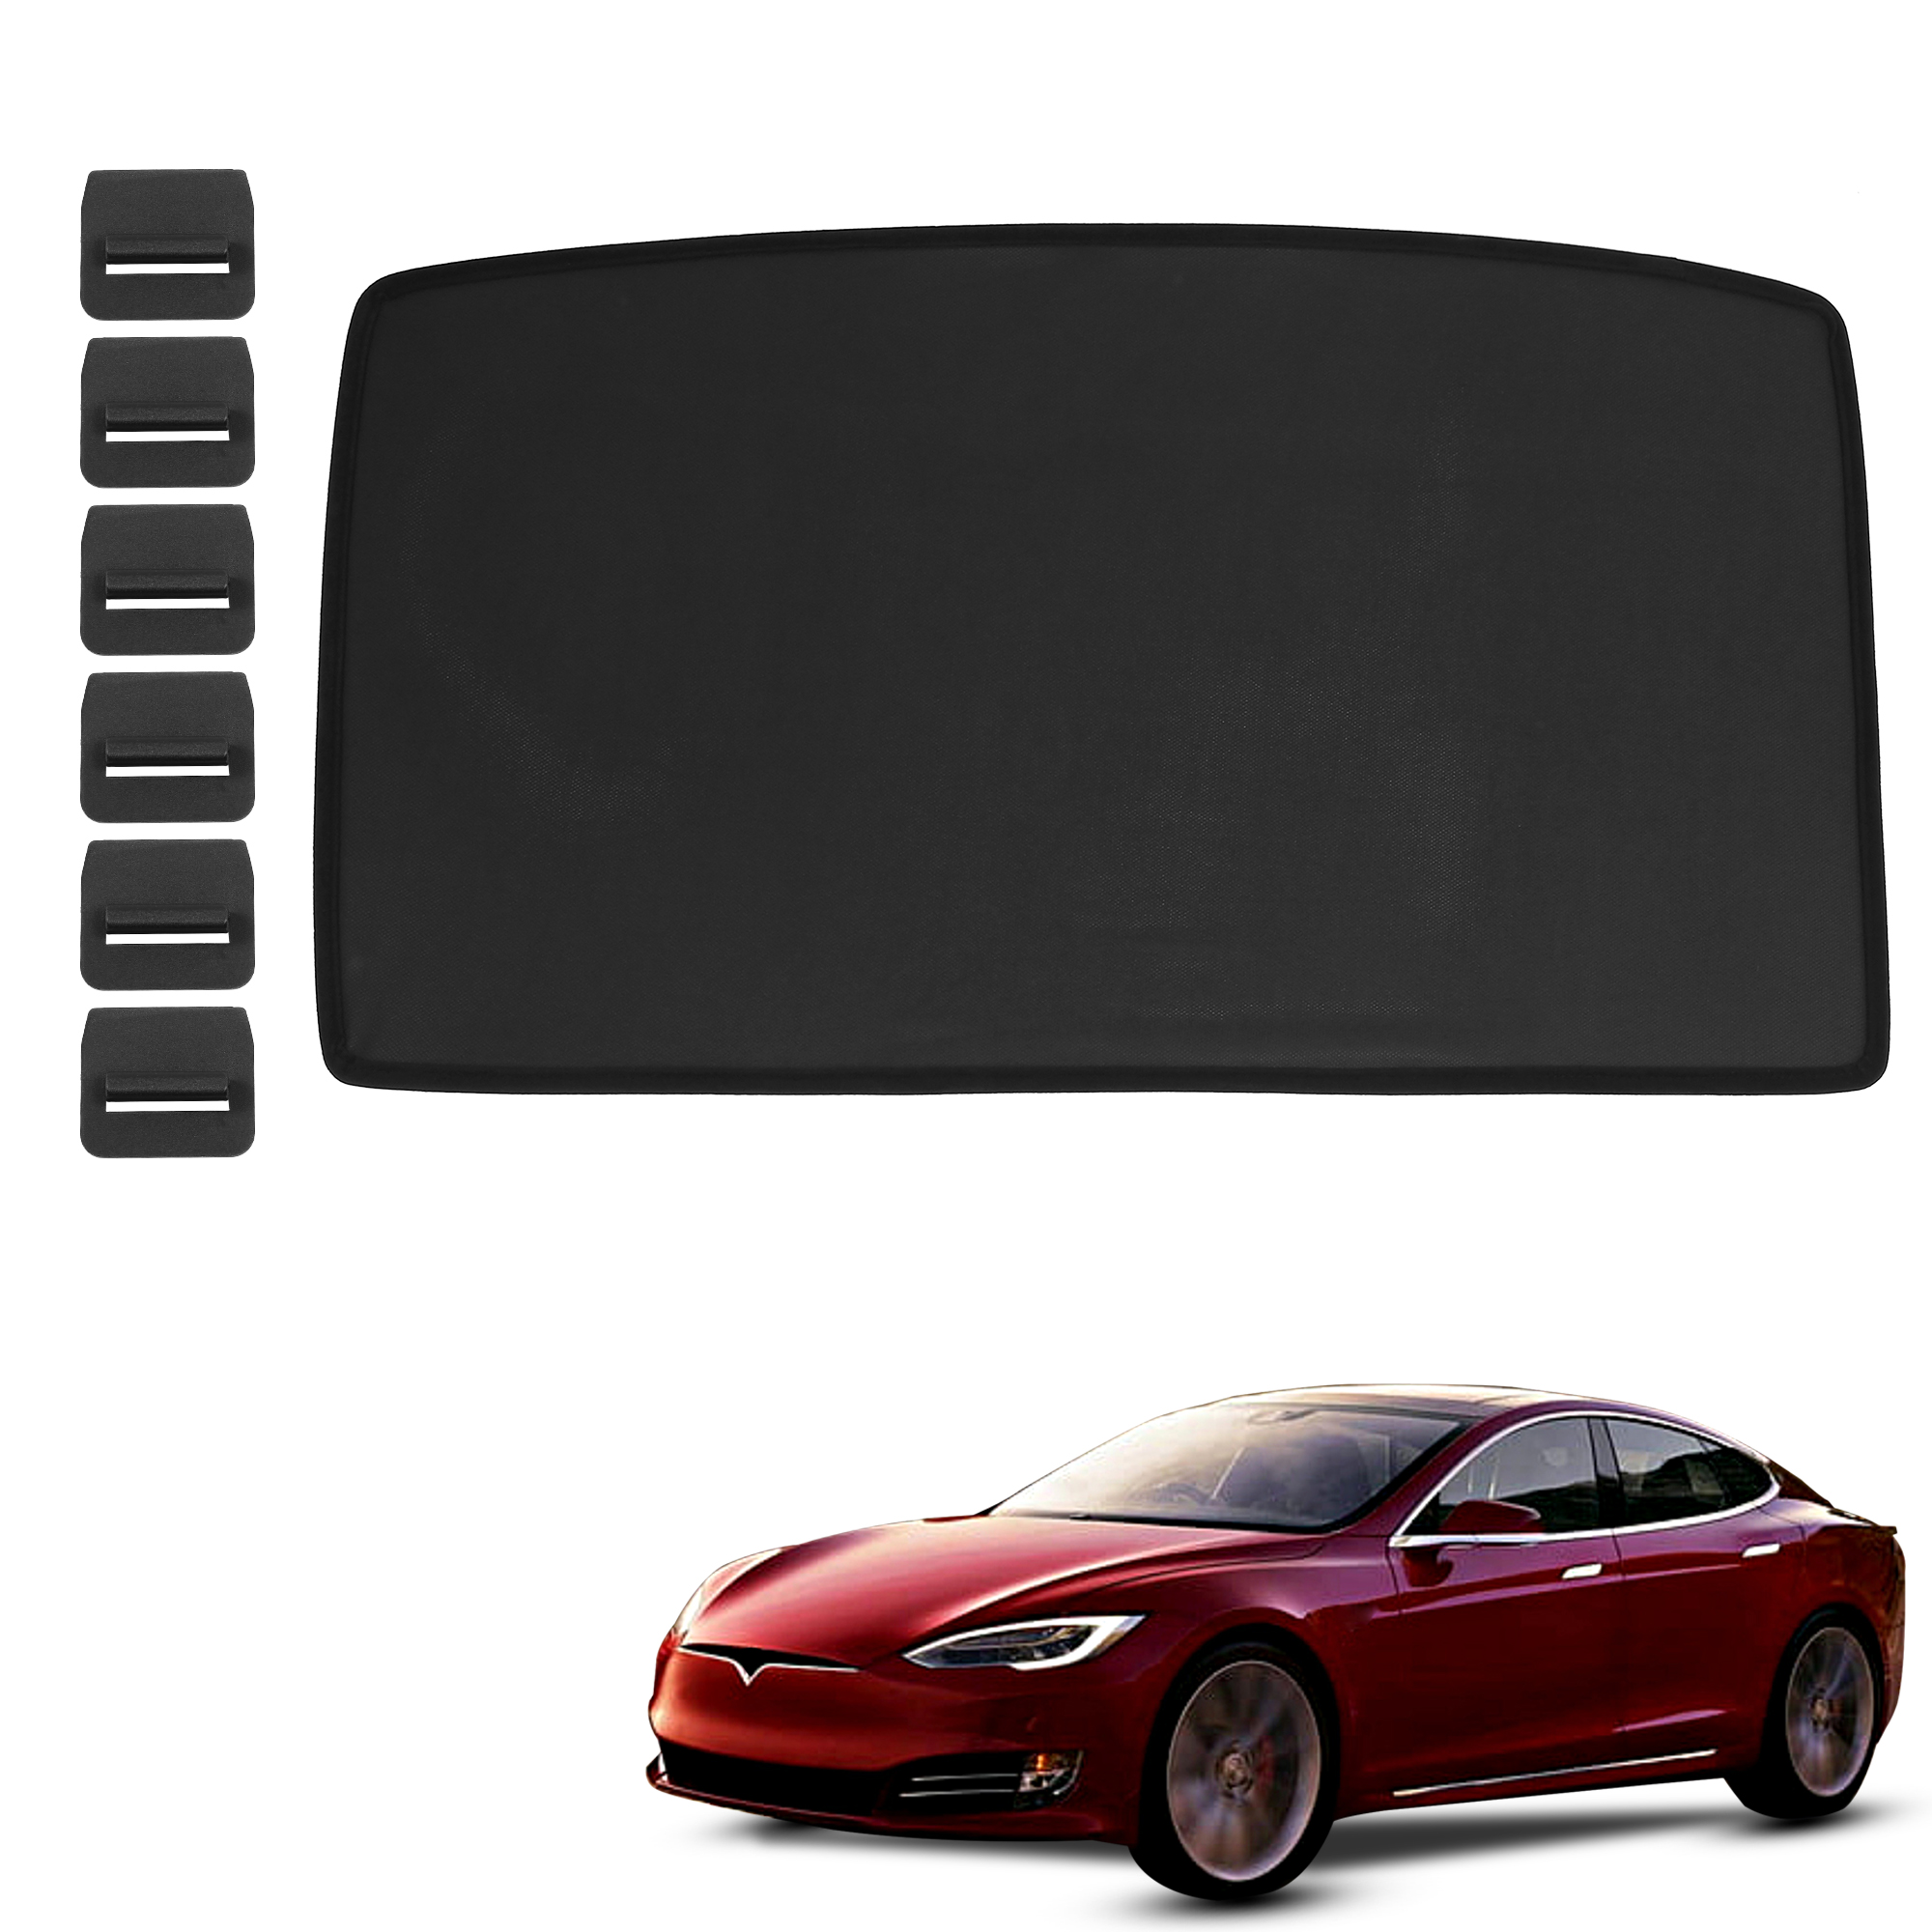 Unique Bargains Glass Roof Sunroof Shade Cover Front Window Sun Shade for Tesla Model S Top Roof